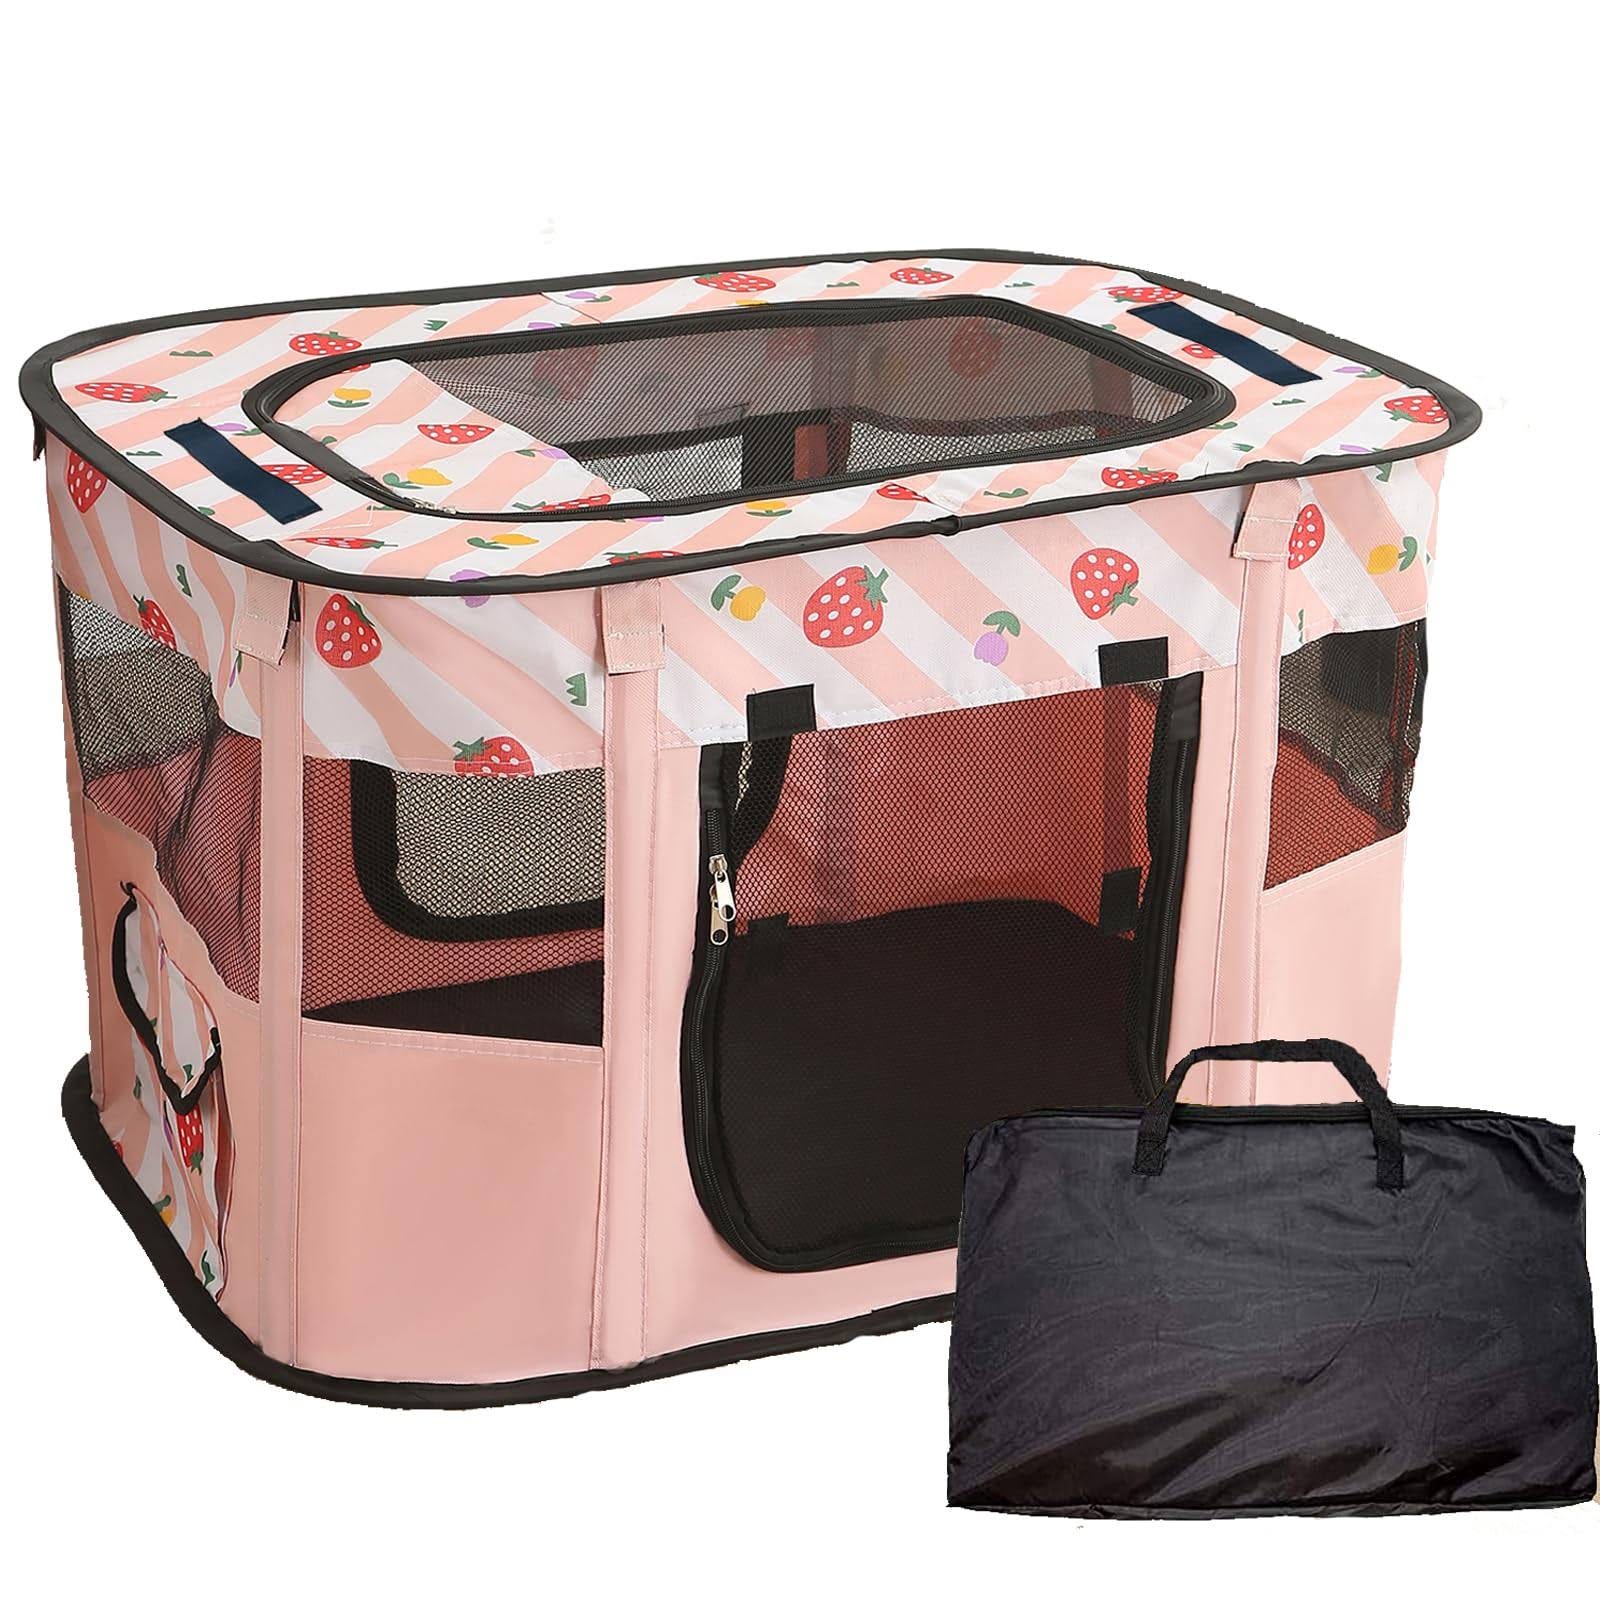 Portable Pet Playpen for Small Animals | Image